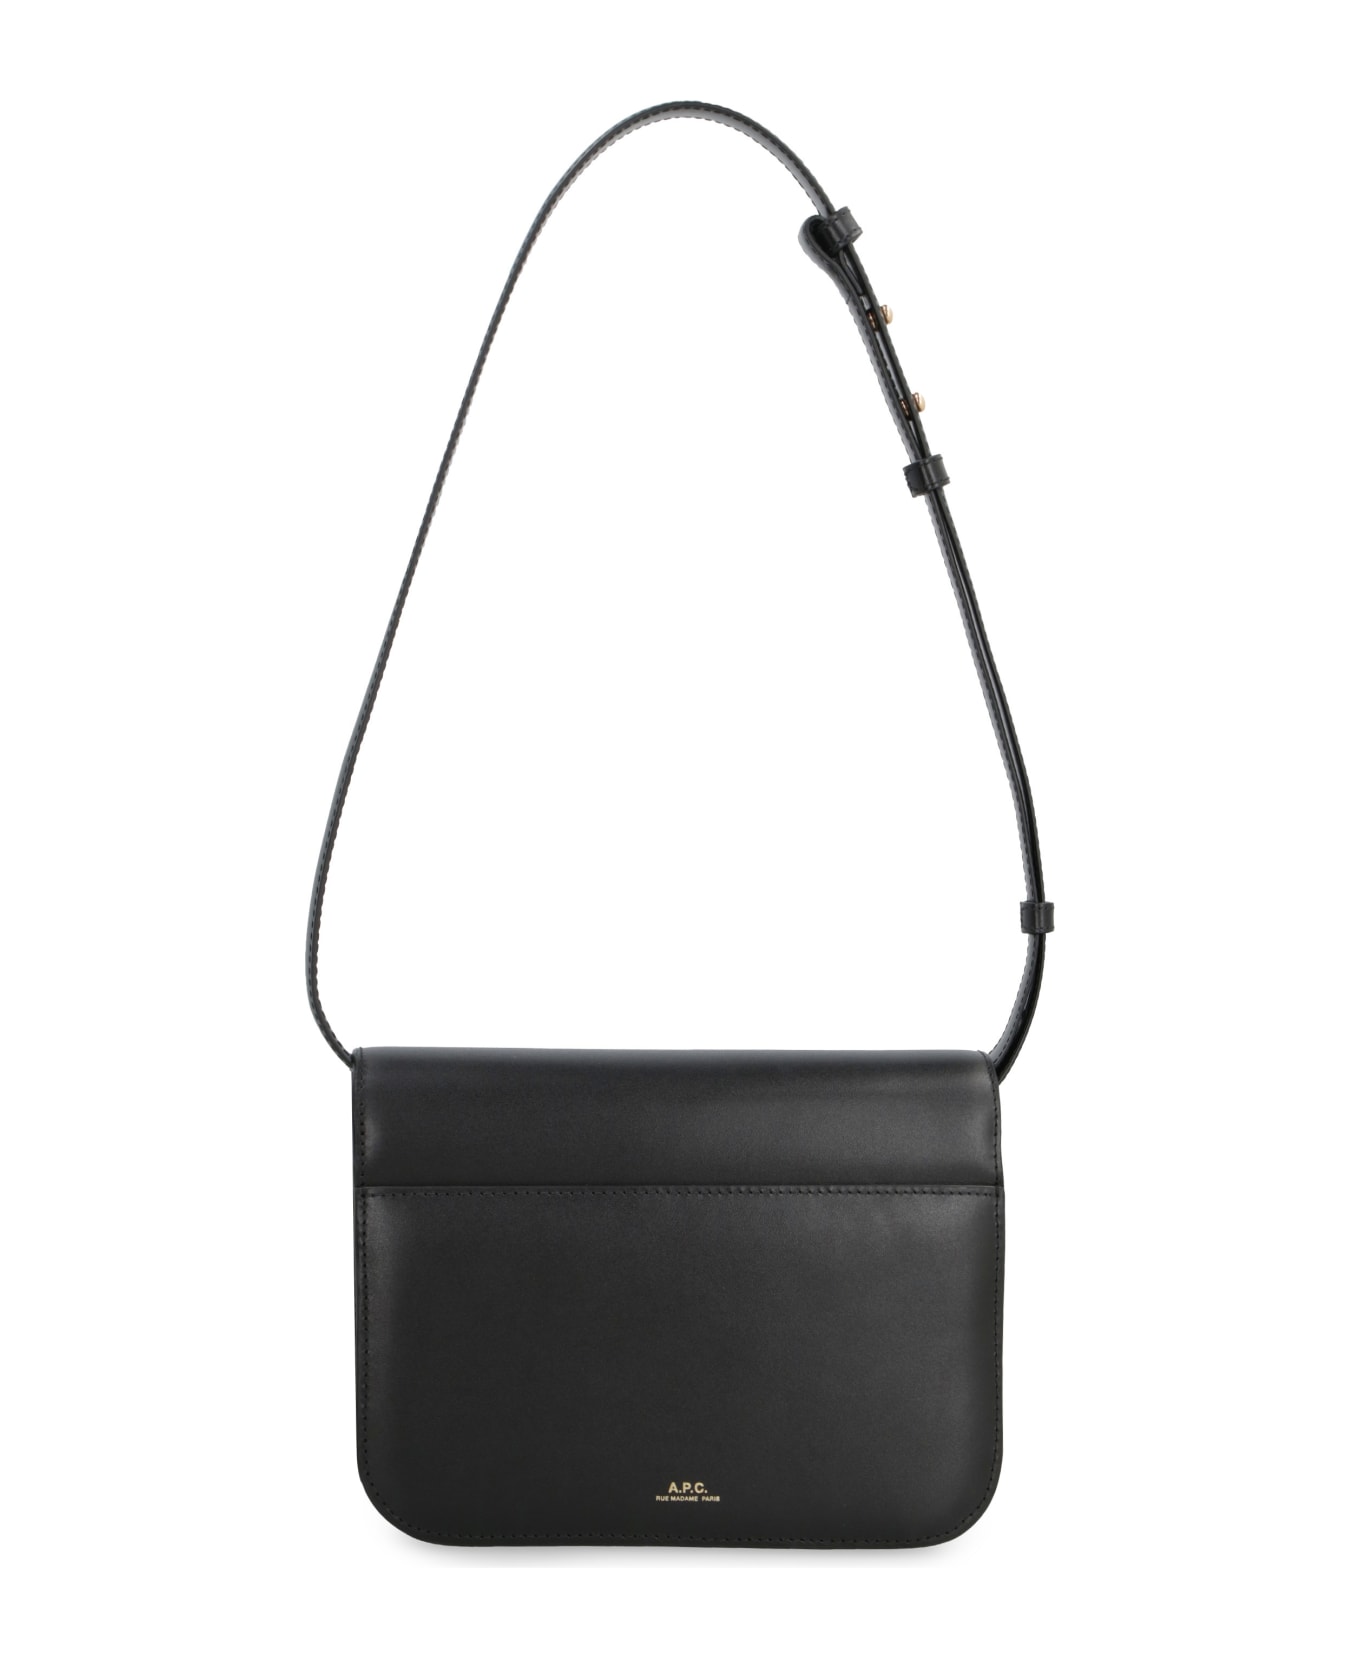 A.P.C. Astra Leather Small Bag - black